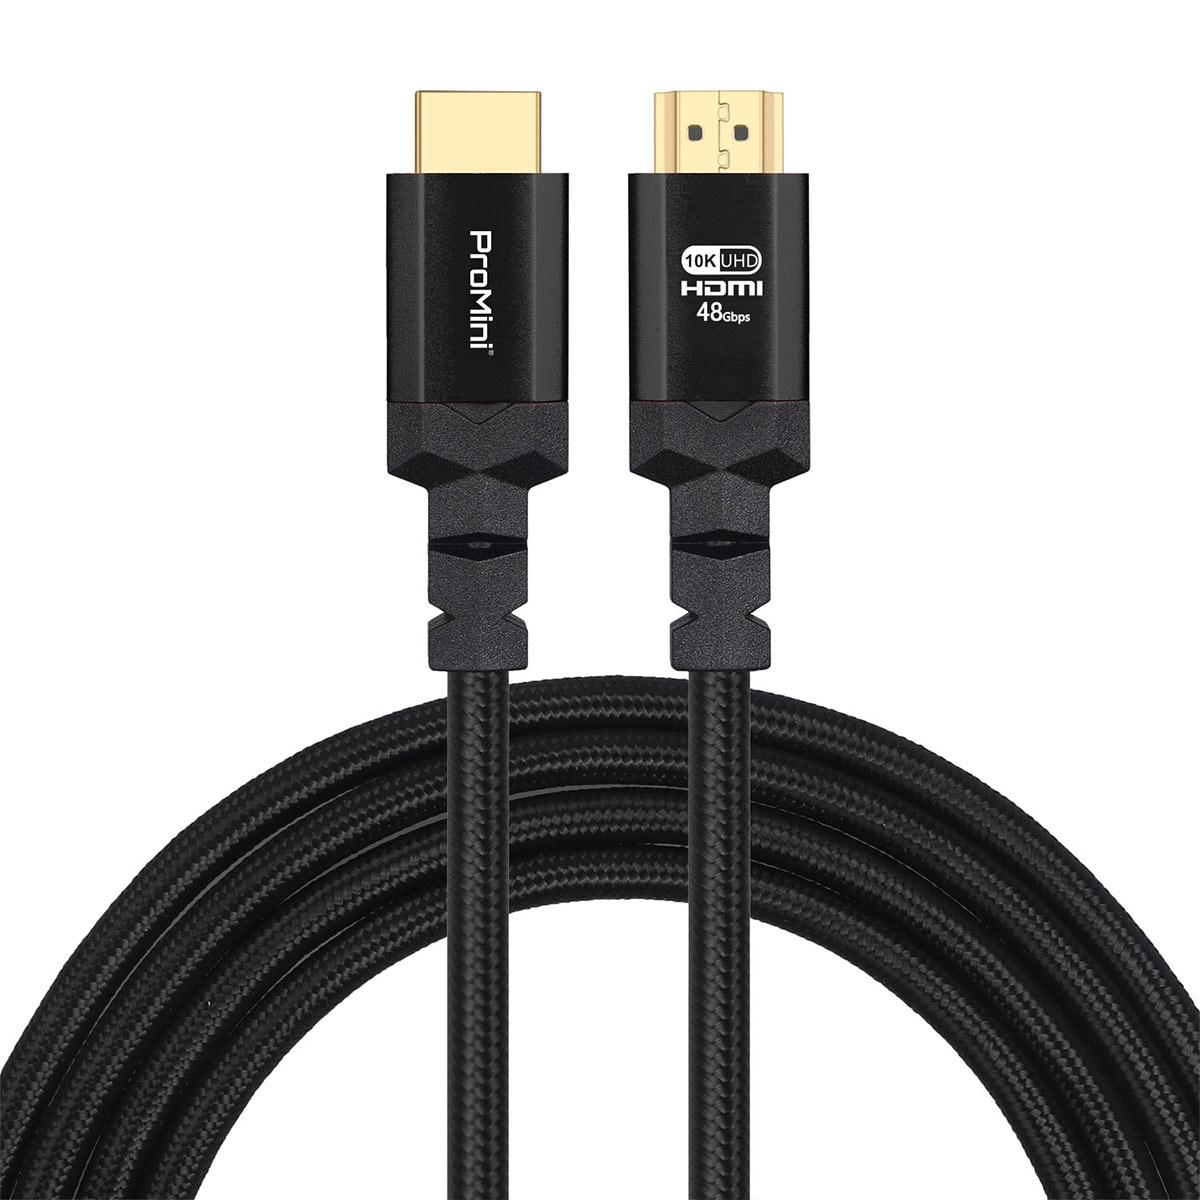 Magic-Pro ProMini 10K HDMI 2.1 Ultra High Speed Cable 1.2M, , large image number 1